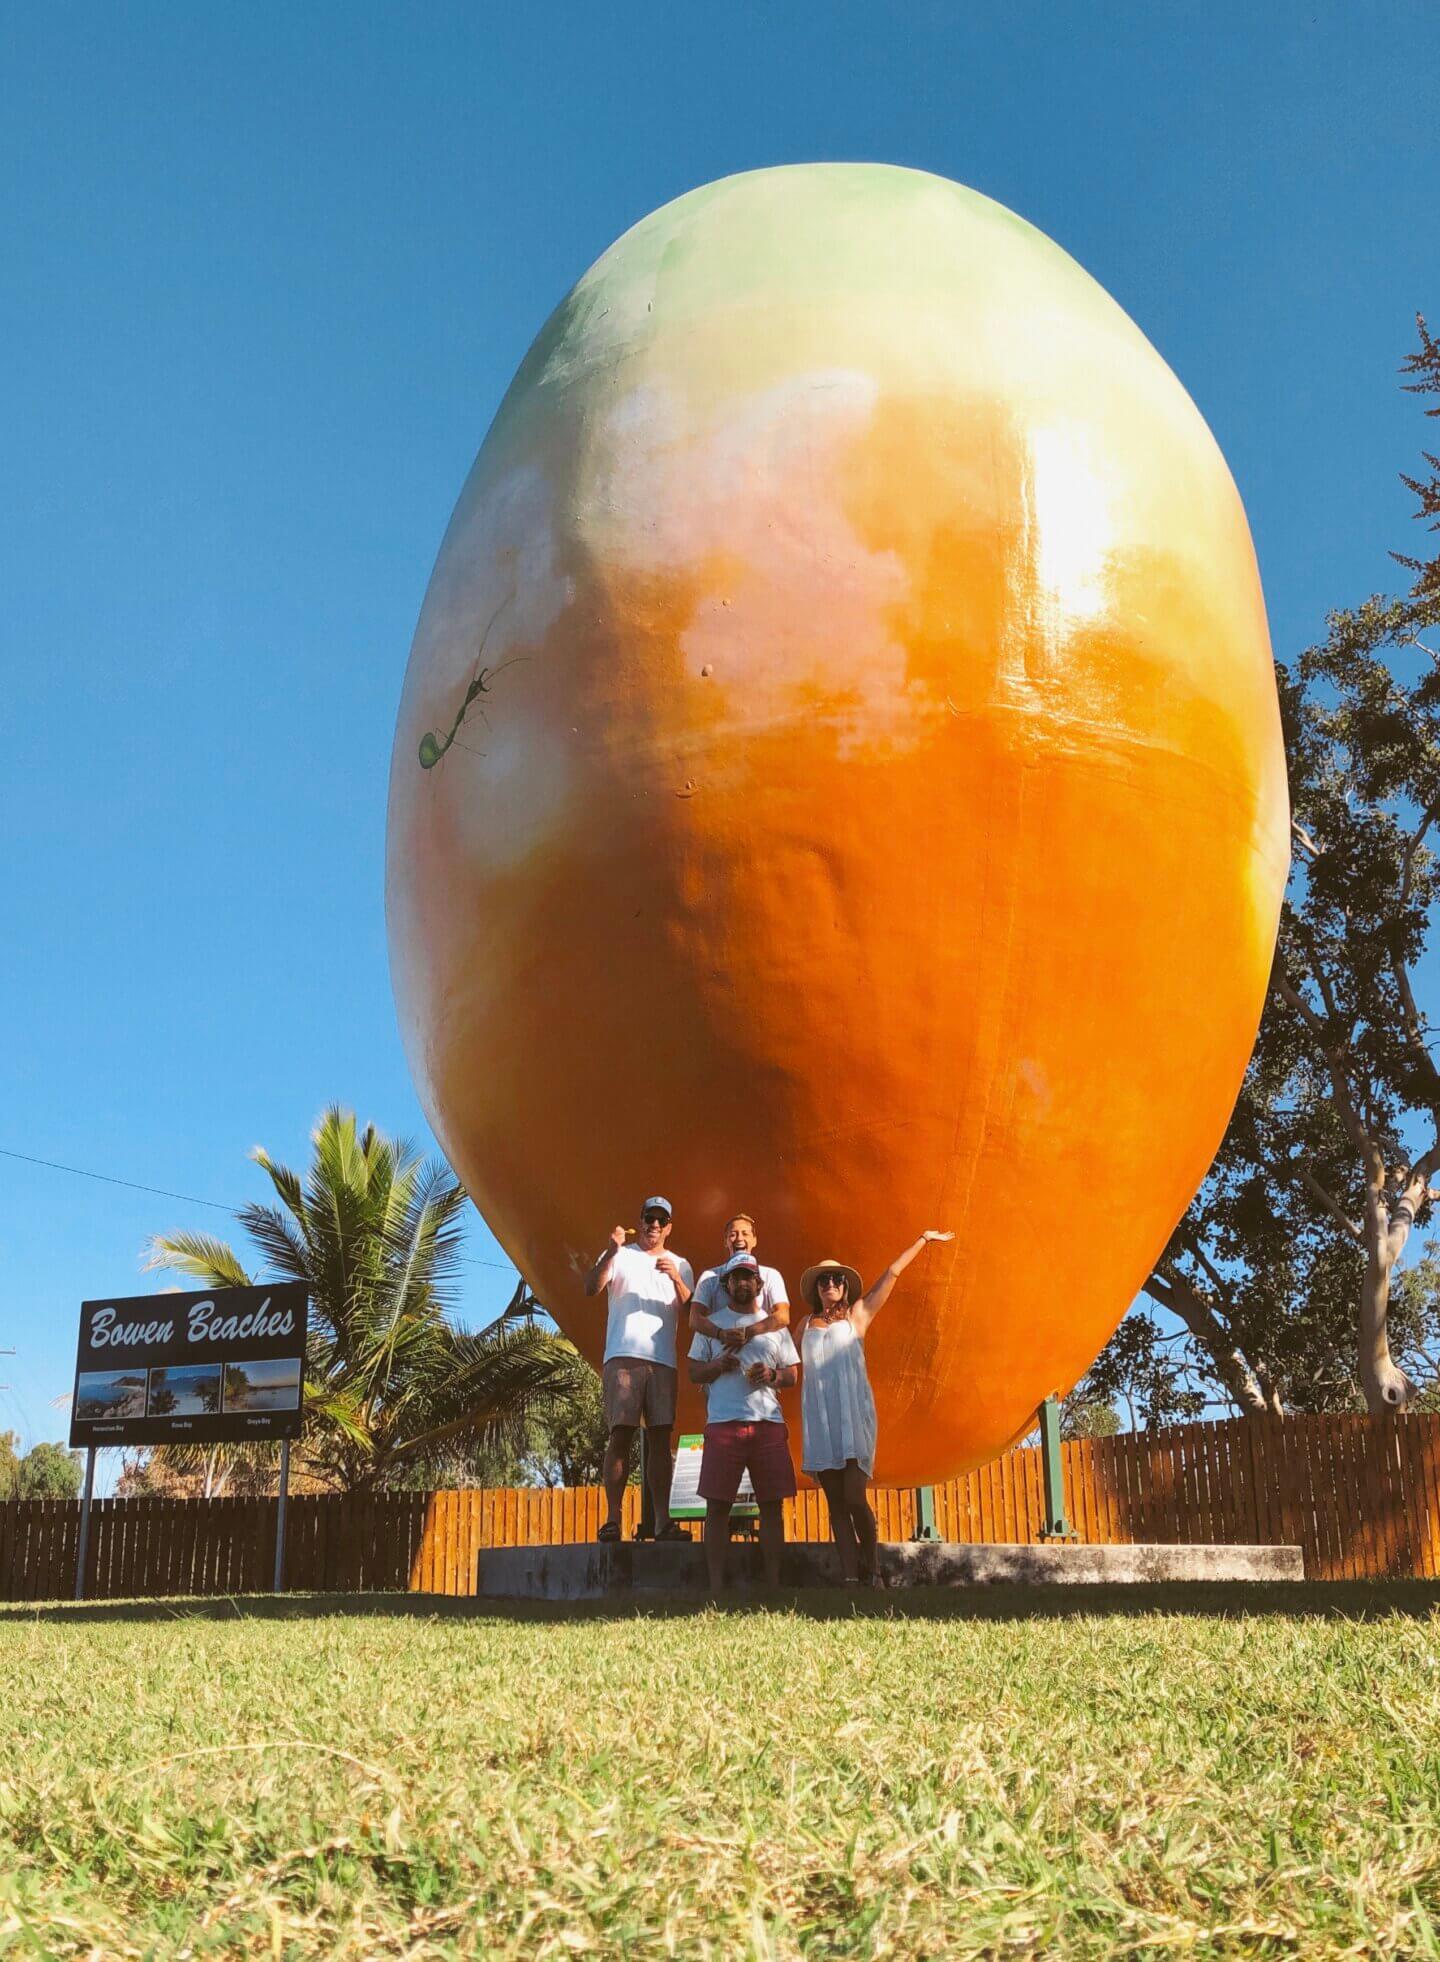 Four friends standing in front of the big mango statue in Bowen queensland